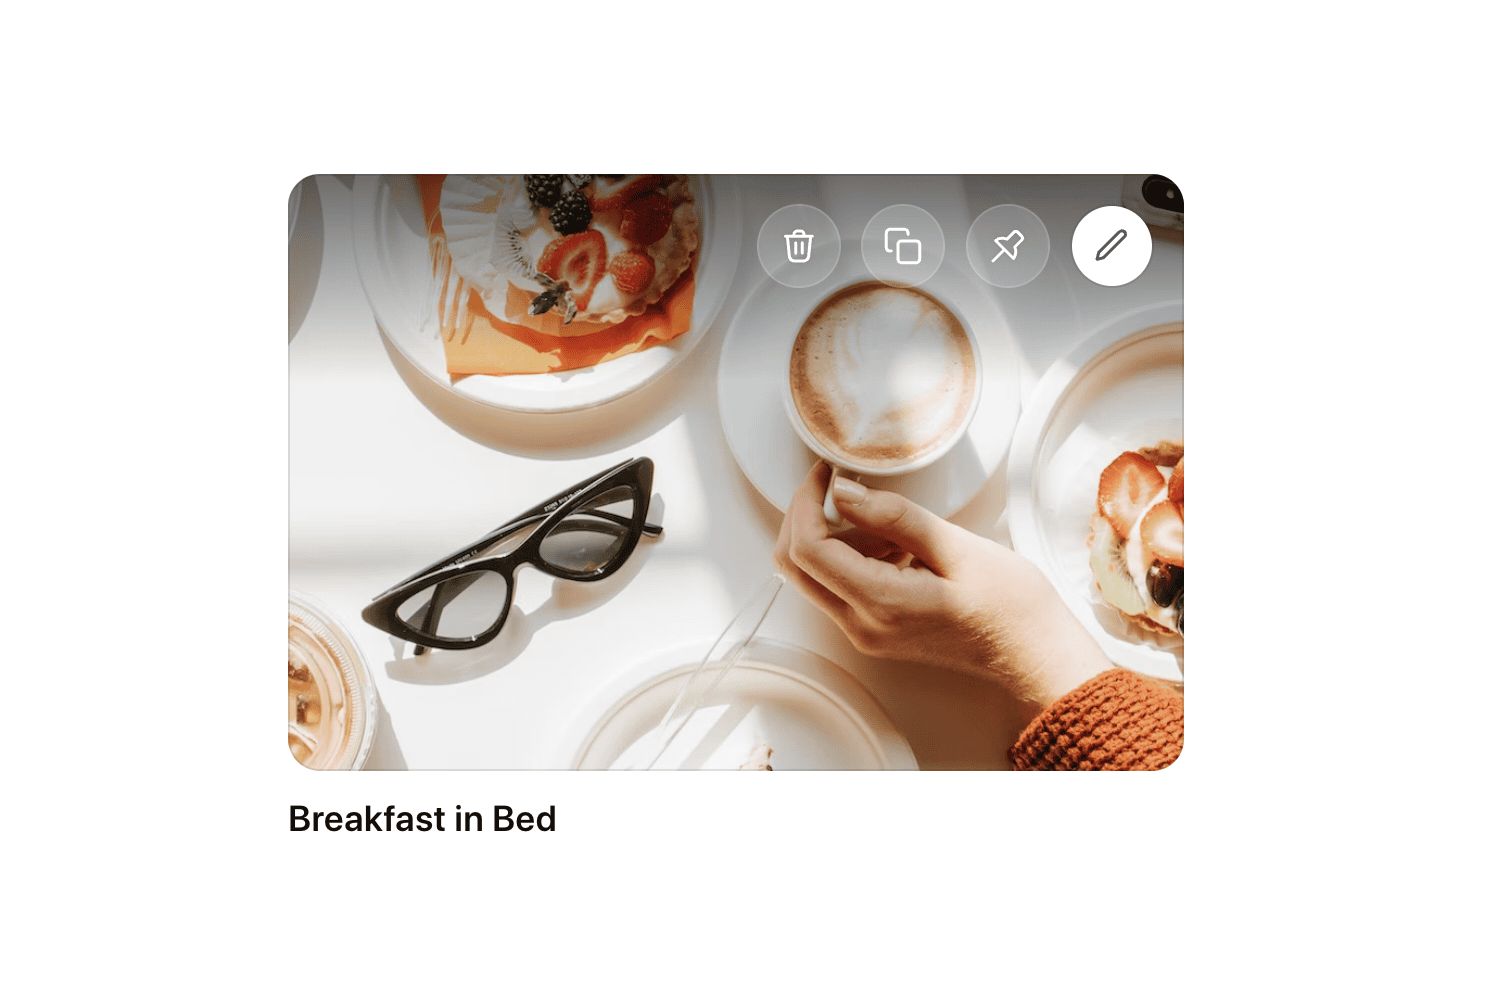 Breakfast in Bed: A fixed amount gift